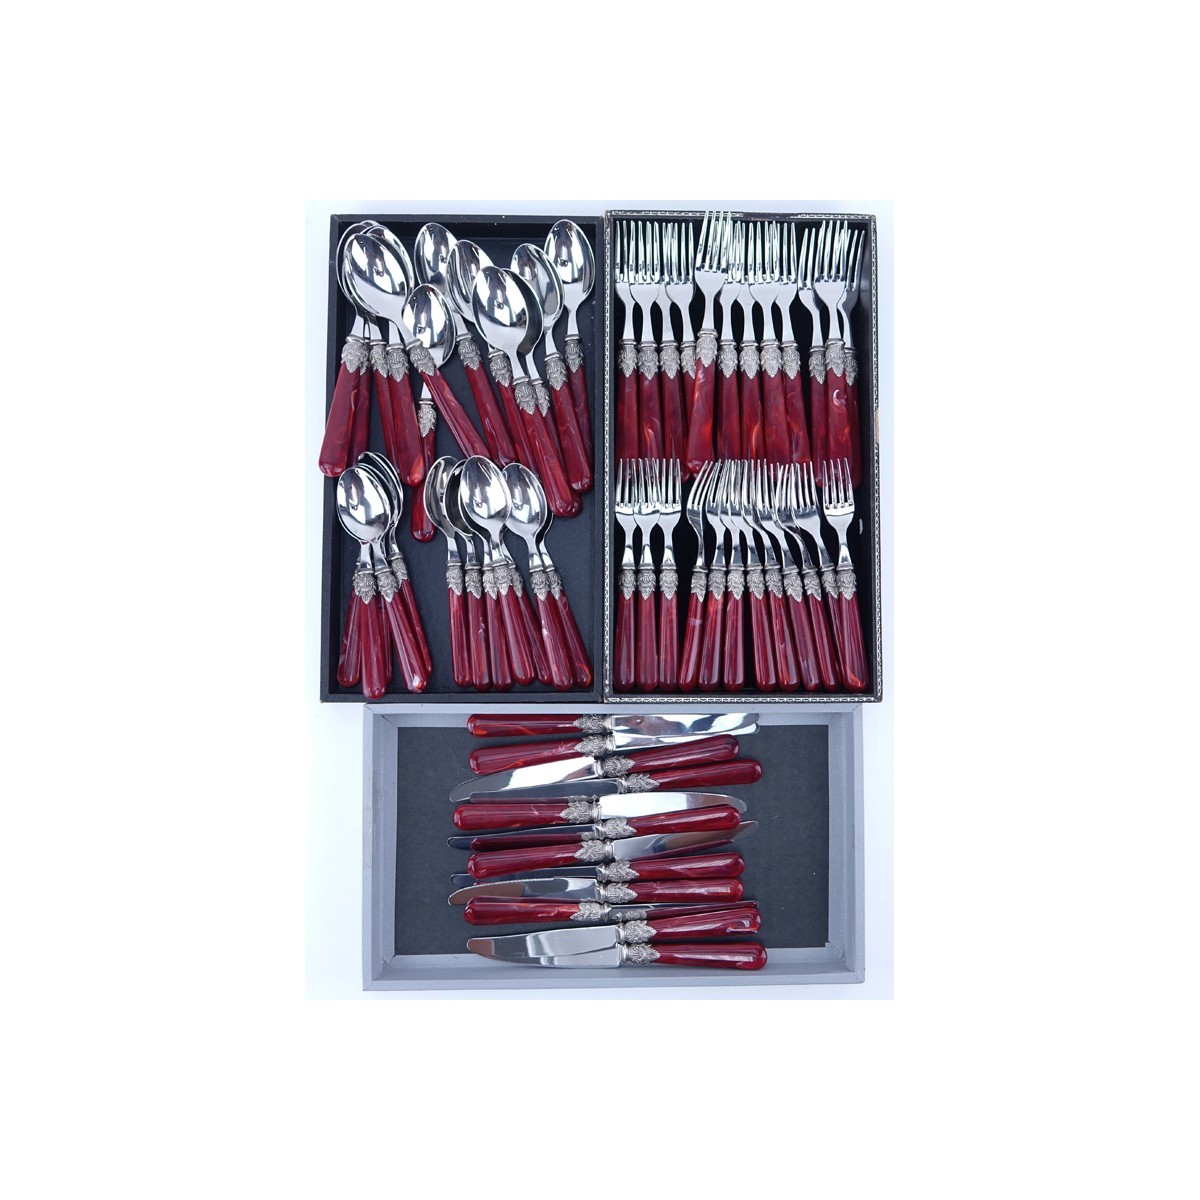 Sixty (60) Piece Italian EME Inox 18/10 Napoleon Pearlized Handle and Stainless Steel Flatware. Includes: 12 dinner forks 7-7/8", 12 salad forks 7", 12 tablespoons 7-3/4", 12 tea spoons 7", 12 knives.